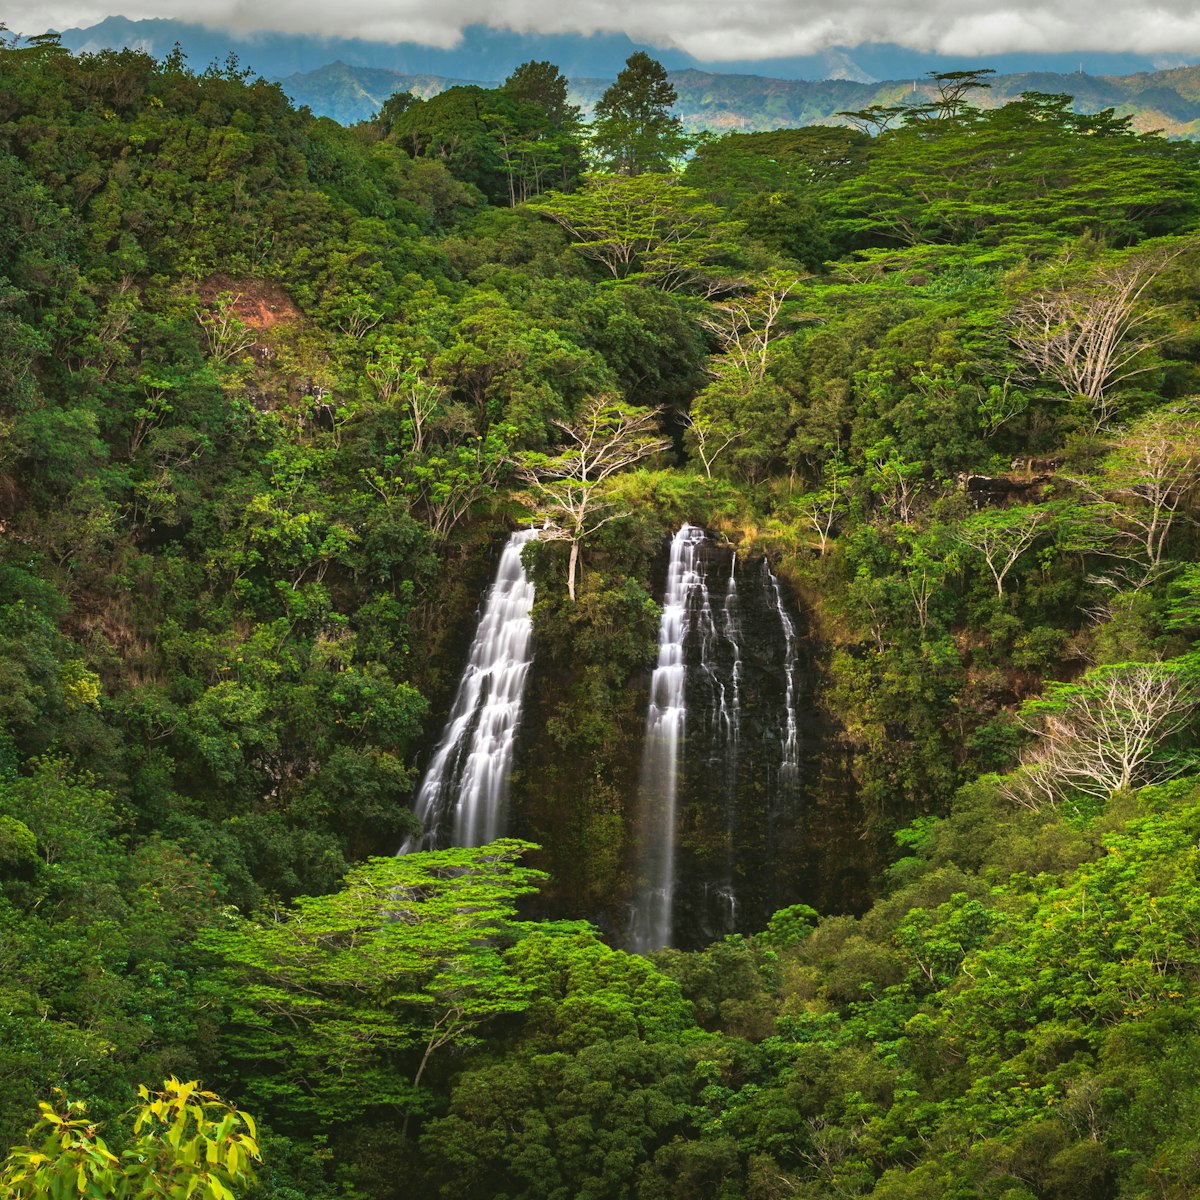 ʻŌpaekaʻa Falls, a waterfall located on the ʻŌpaekaʻa Stream in Wailua River State Park on the eastern side of the island of Kauai, Hawaii, United States.; Shutterstock ID 1378671545; purchase_order: 65050; job: ; client: ; other:
1378671545